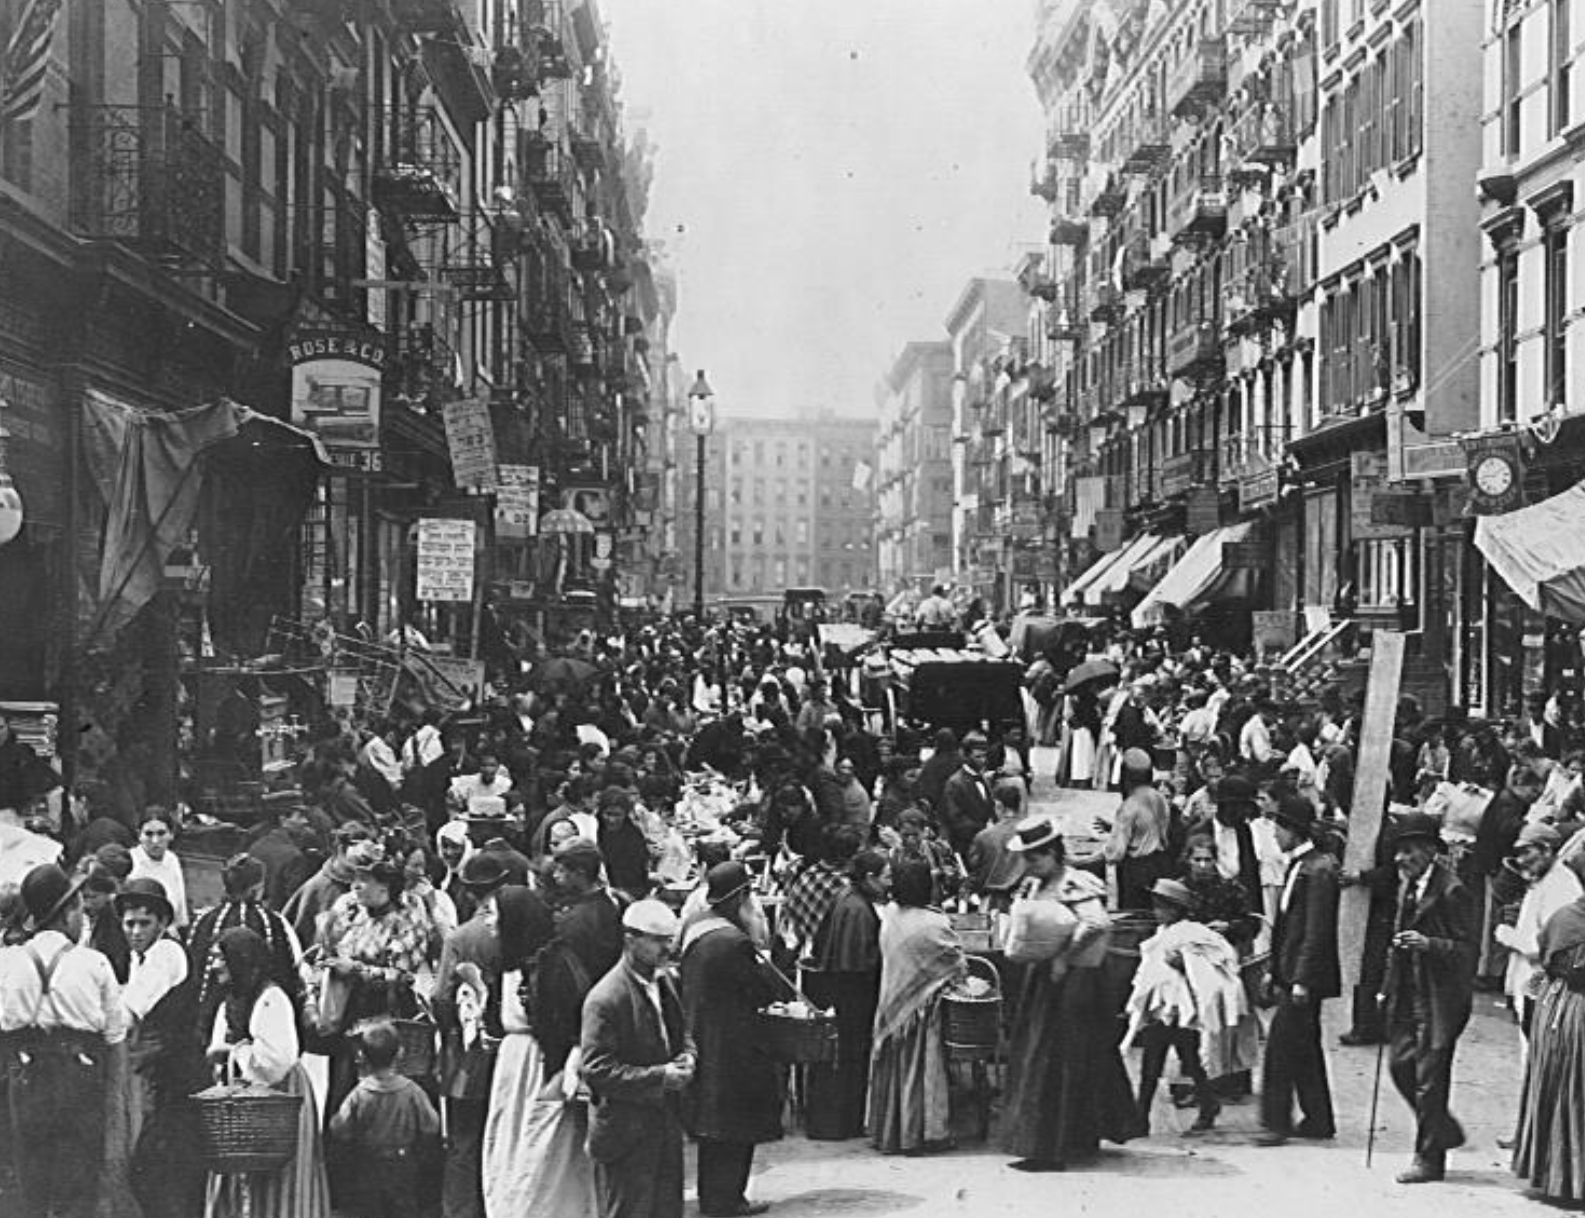 Old photo of a busy street crowded with people